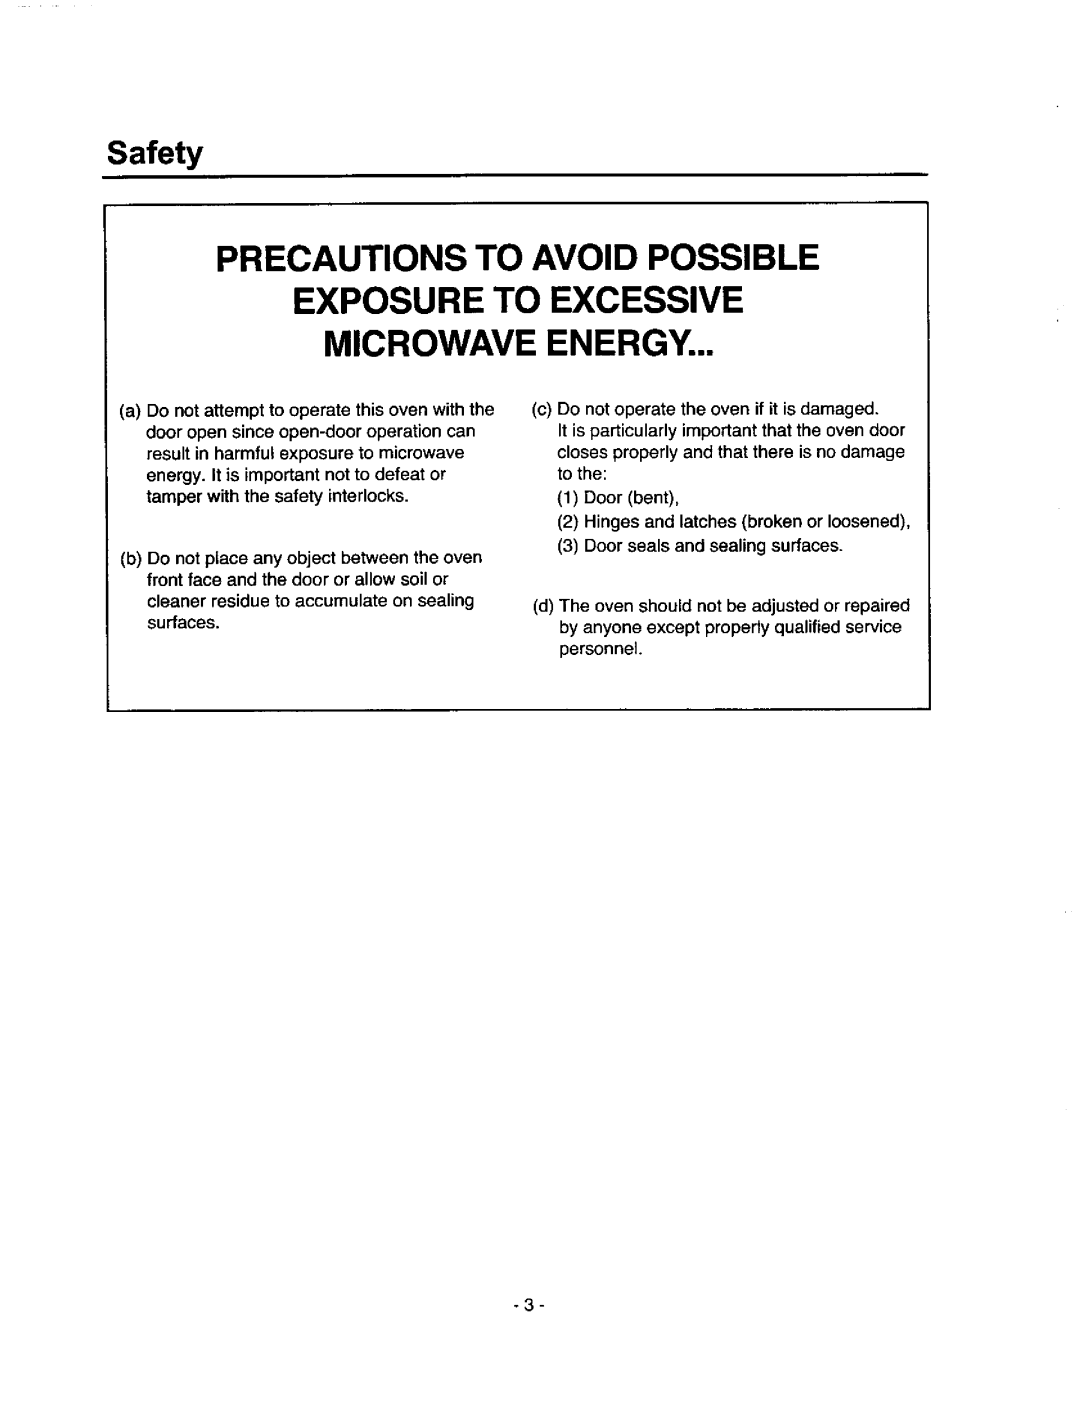 Amana MVH250W, MVH250L owner manual Precautions To Avoid Possible, Exposure To Excessive Microwave Energy, Safety 